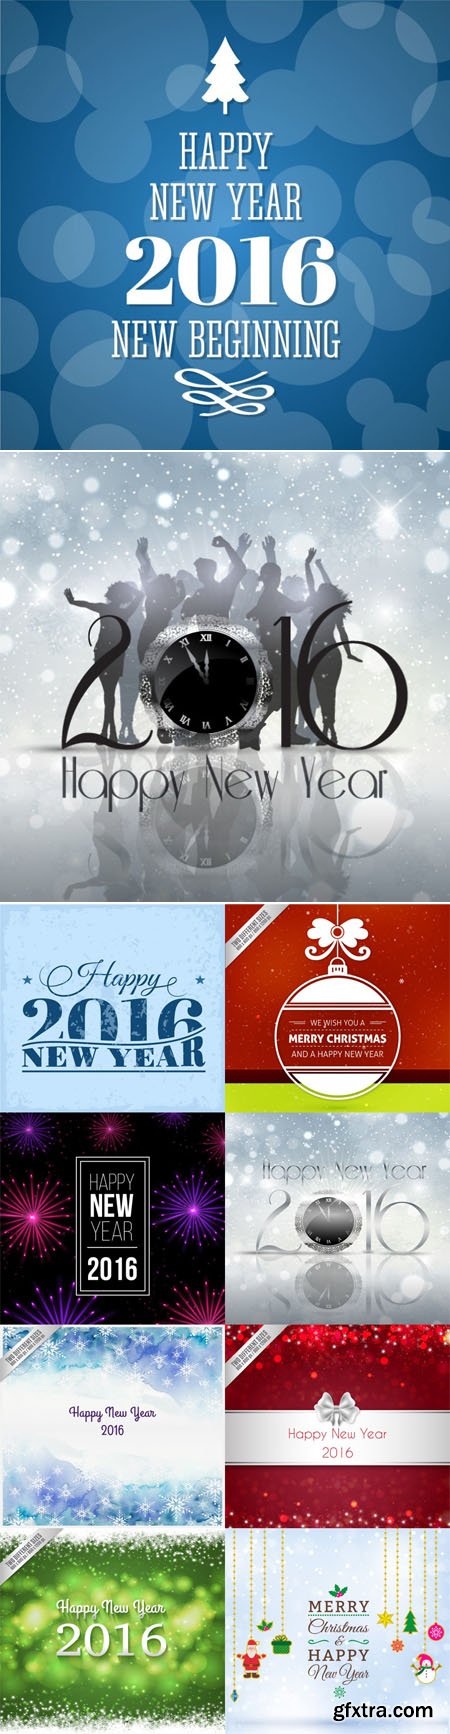 Happy New Year 2016 Backgrounds Vector [Vol.3]